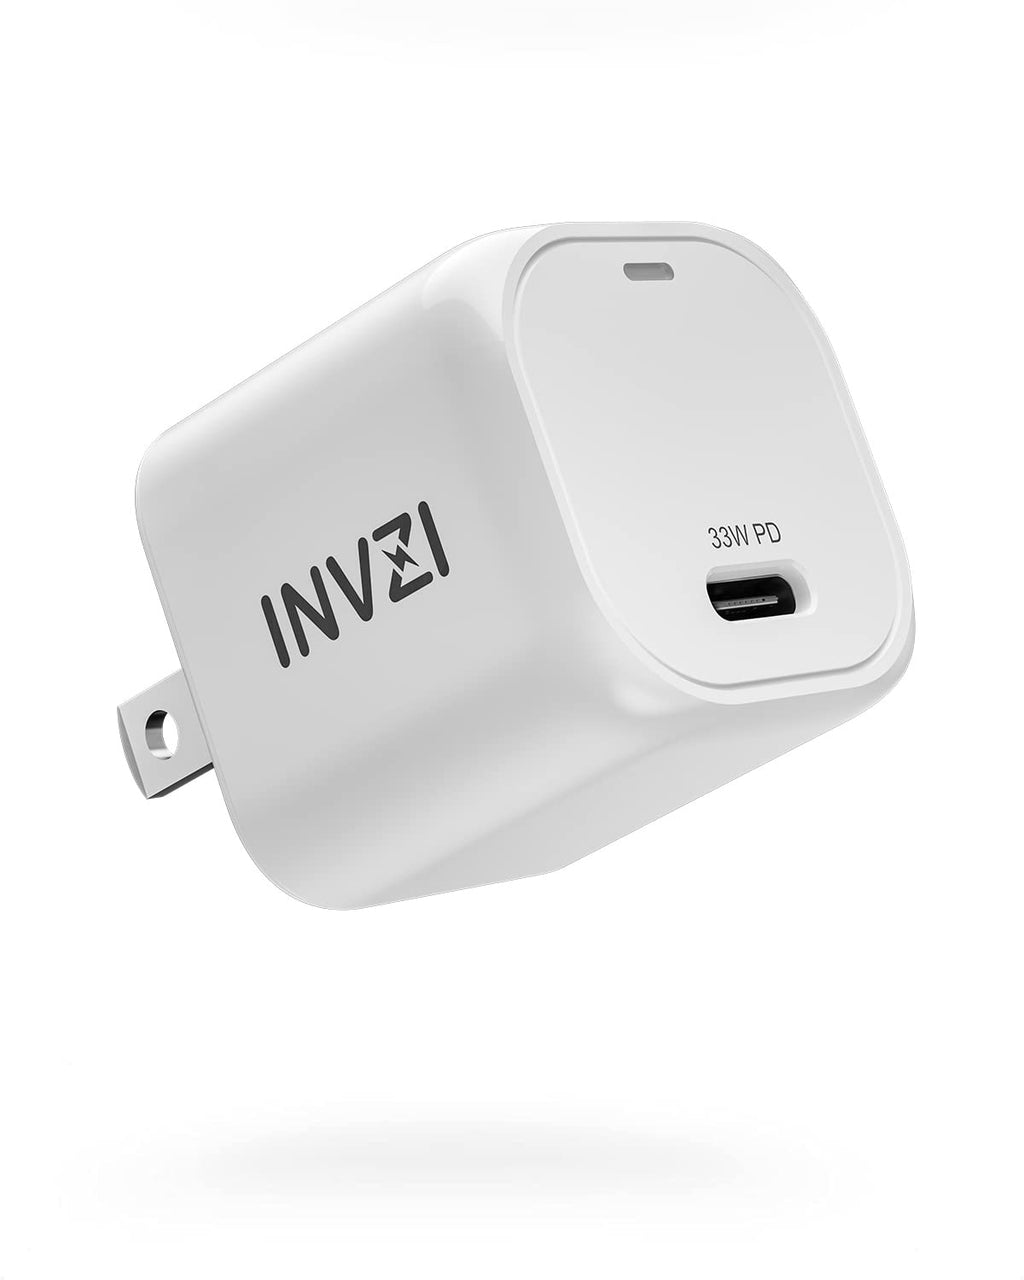  [AUSTRALIA] - USB C Wall Charger 33w, INVZI GaN USB C Charger for iPhone 12 13 Pro Max, GaN II Tech PPS USB-C Fast Charger Block for MacBook Air, iPad Pro, Galaxy S21/S20/S10, Note 20/10+, Pixel 6 Pro White